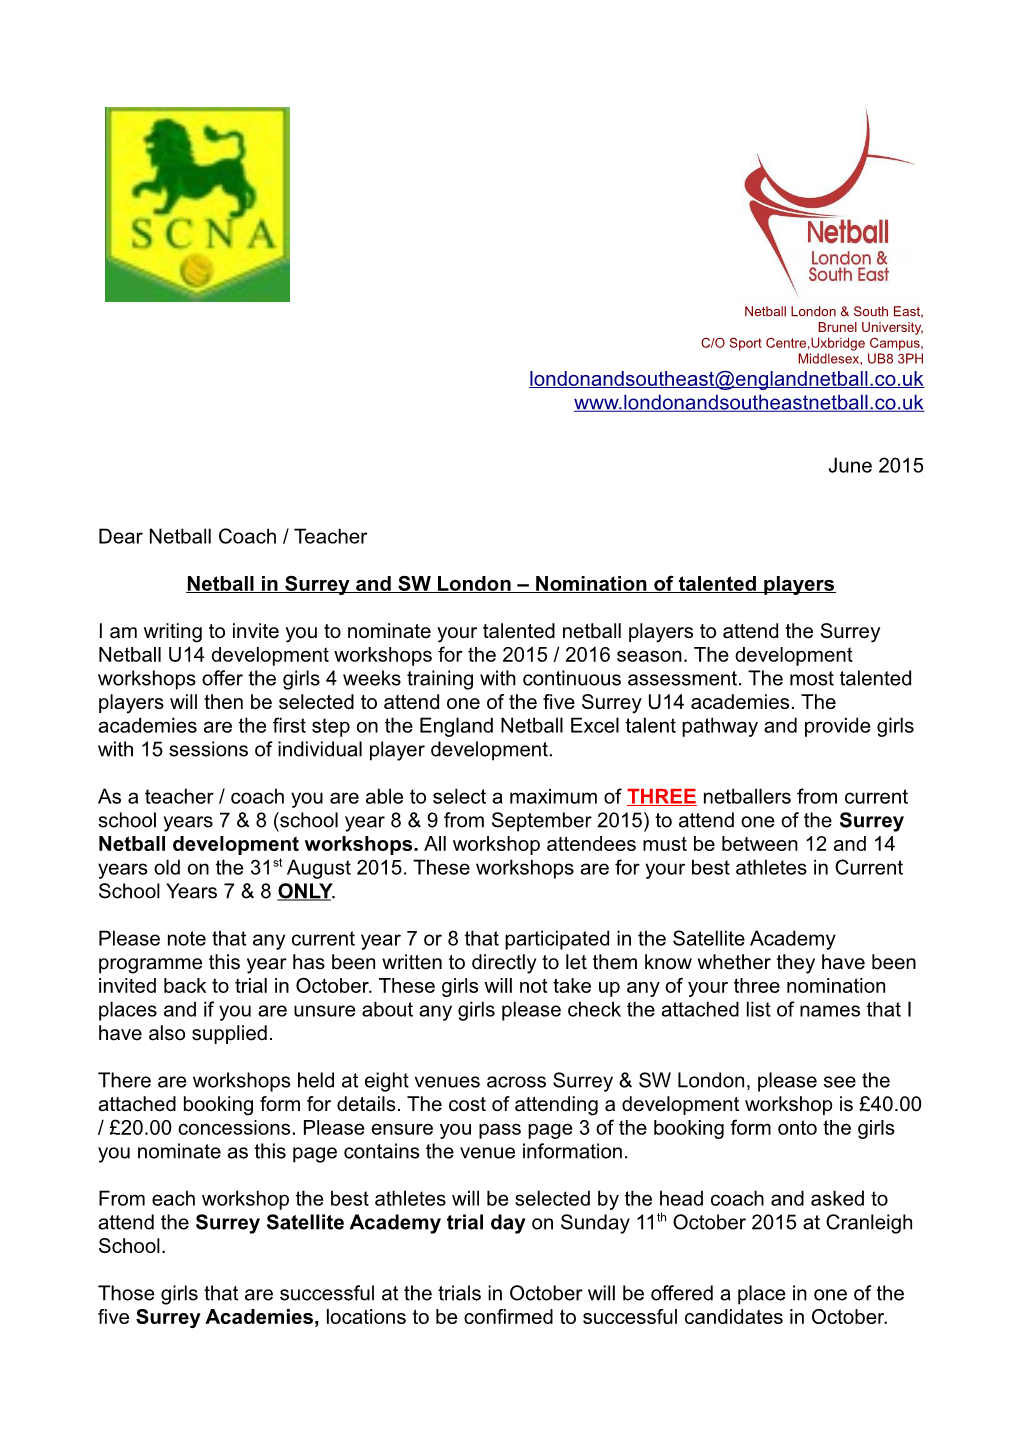 Netball in Surrey and SW London Nomination of Talented Players